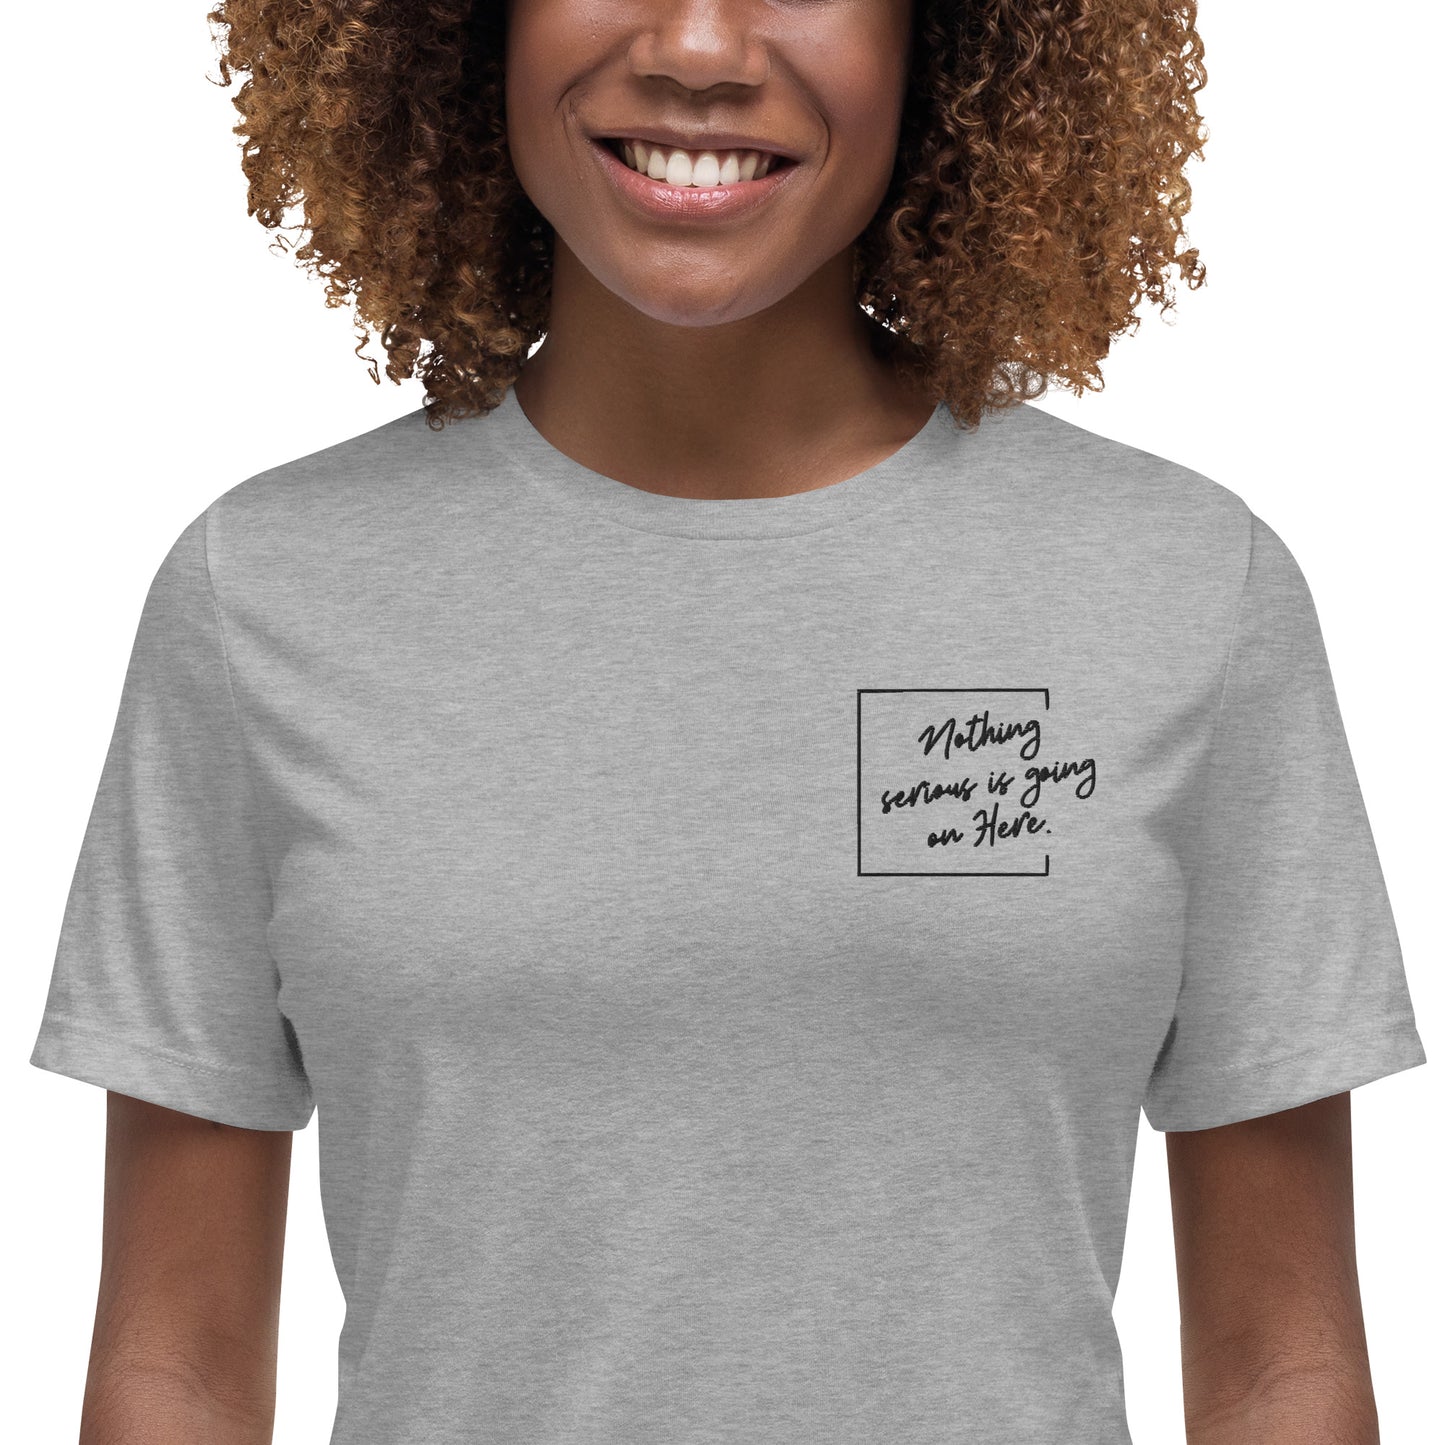 "Nothing Serious is going on Here" Feels Like Fun "Nothing Serious is going on Here". Feels Like Fun® Women's Relaxed T-Shirt